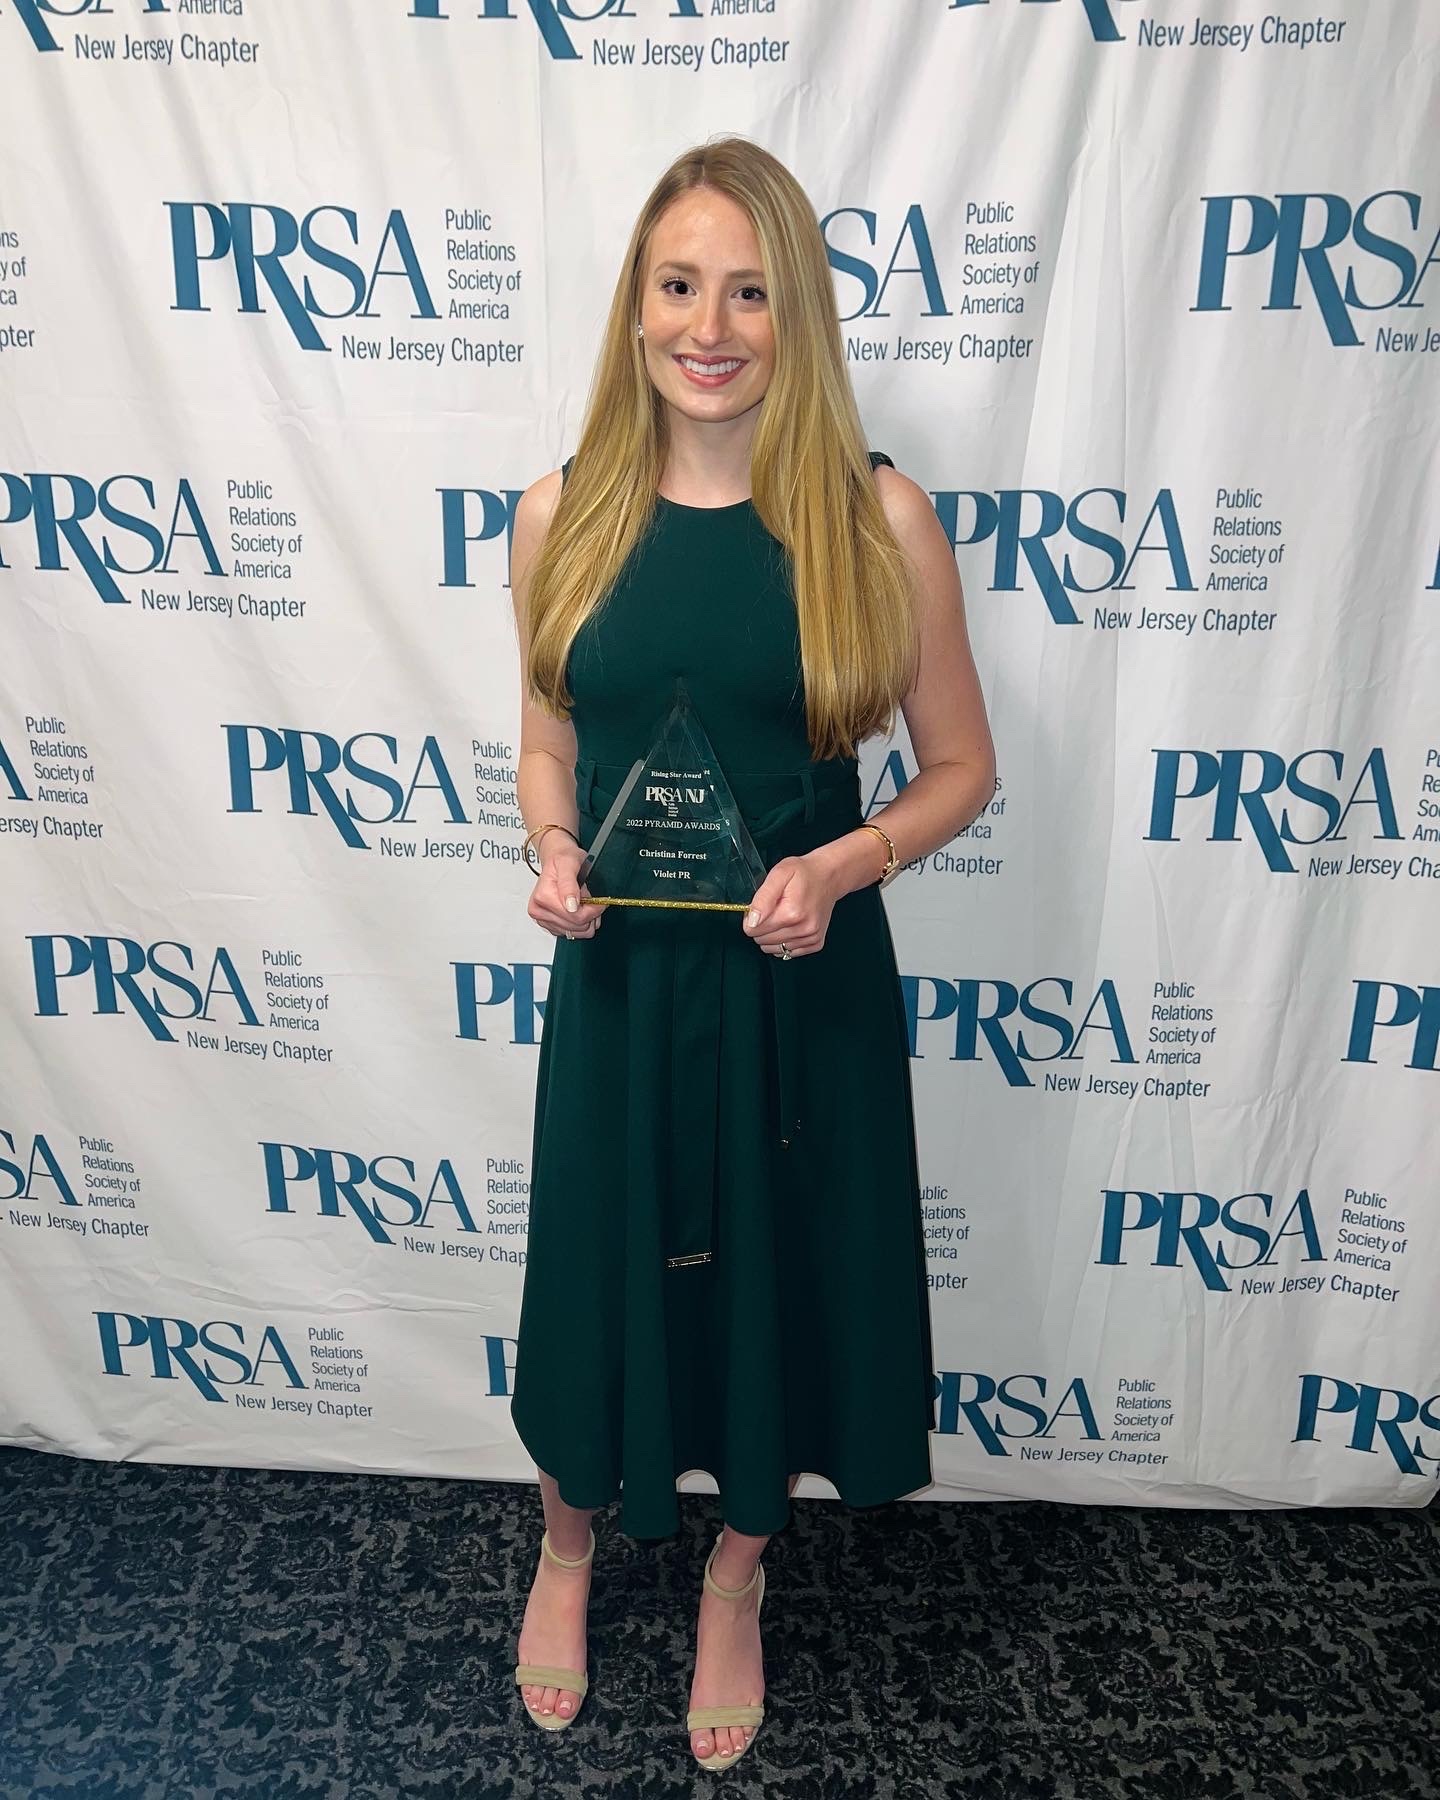 Christina Forrest, account director at Violet PR, was honored with a PRSA-NJ “Rising Star” award.